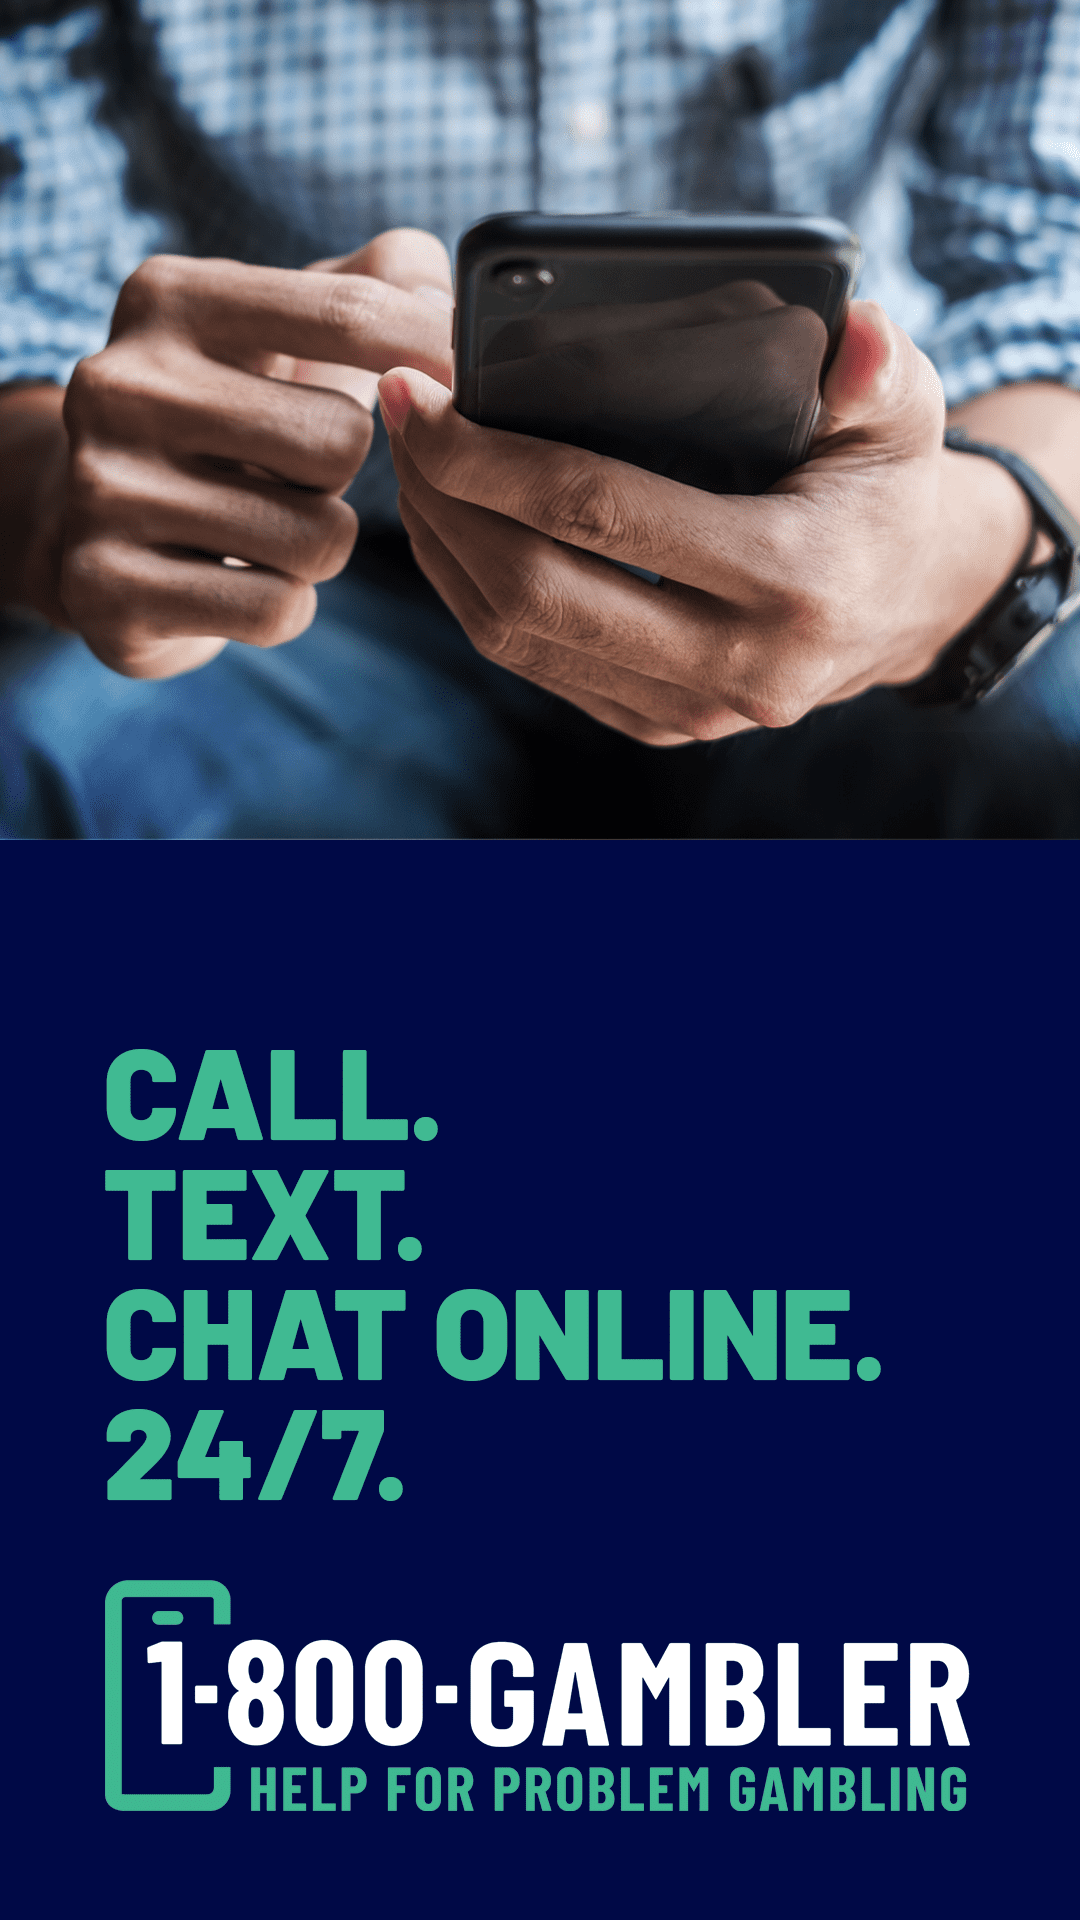 Person holding a cell phone. Call. Text. Chat. 24/7. 1-800-GAMBLER. Help for Problem Gambling.